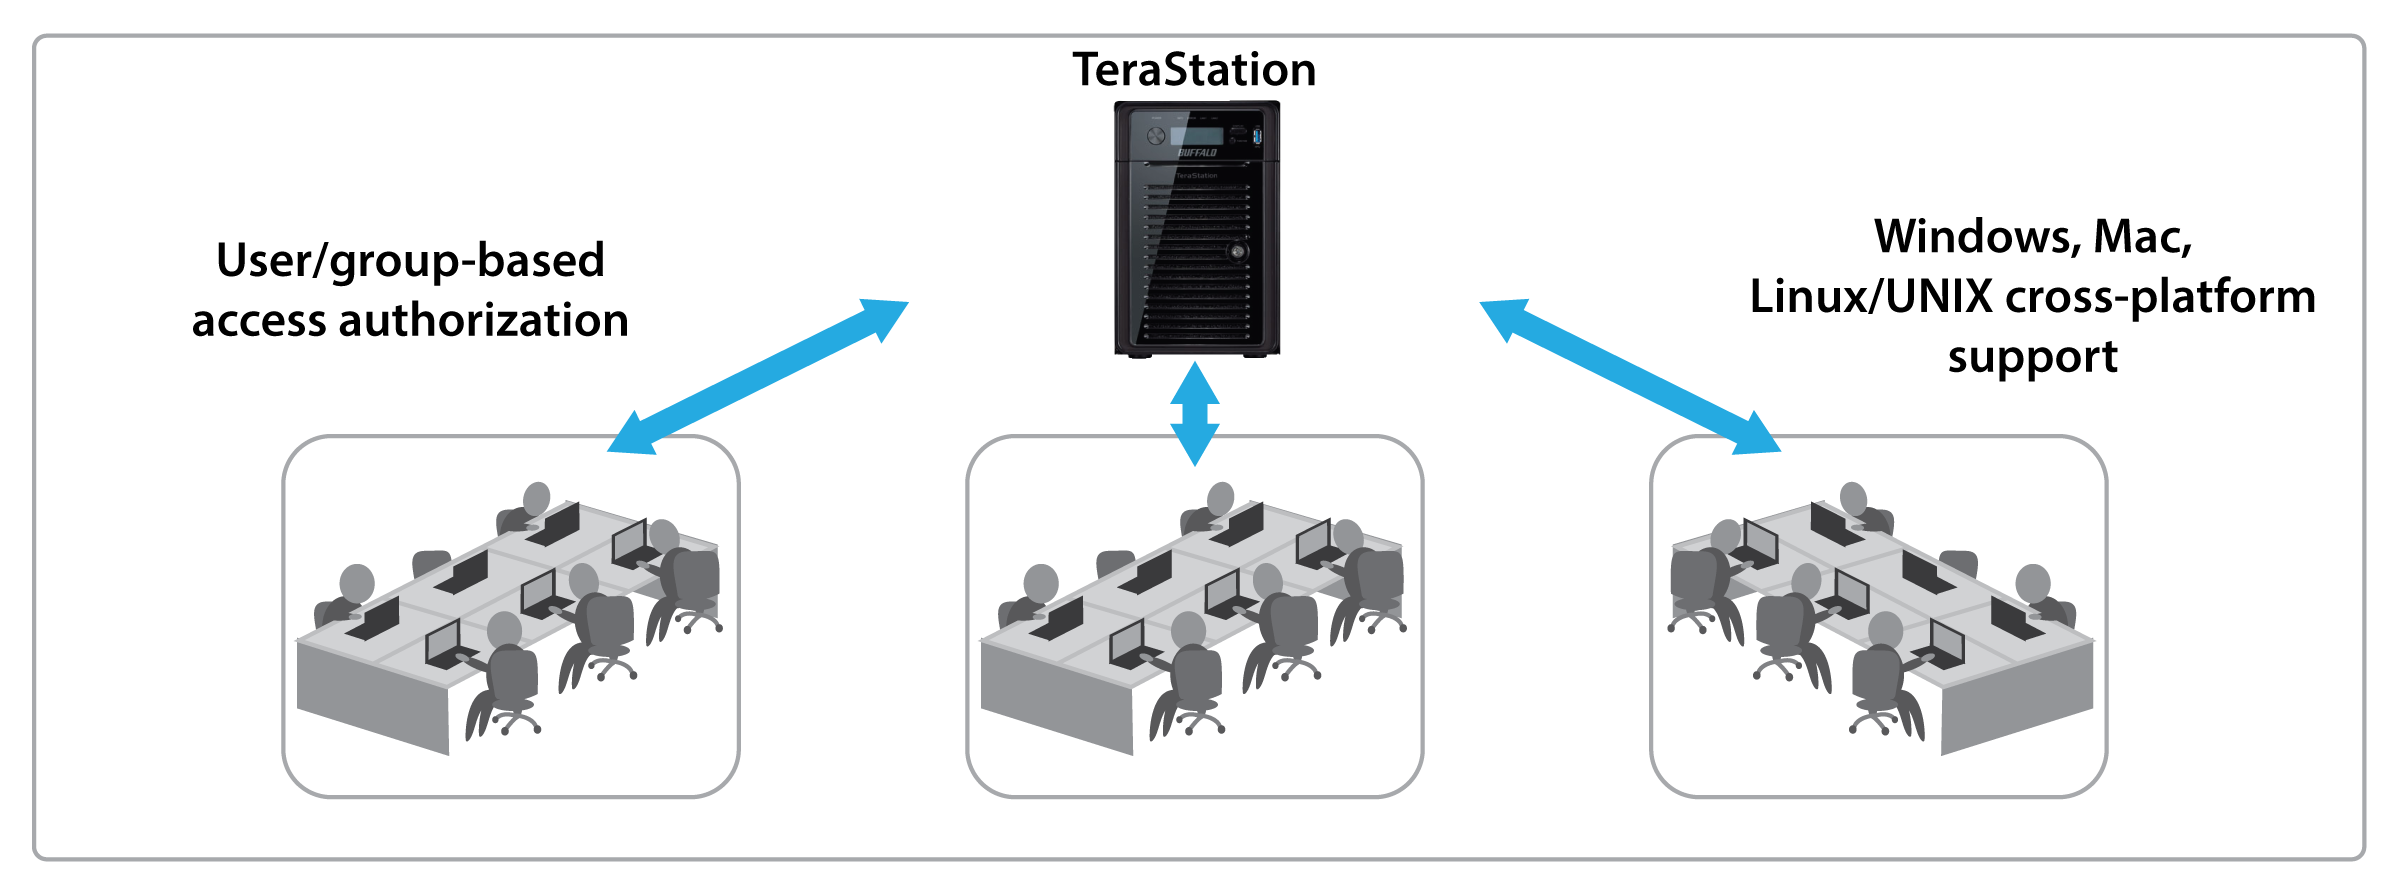 terastation 5000 reliable and secure network storage